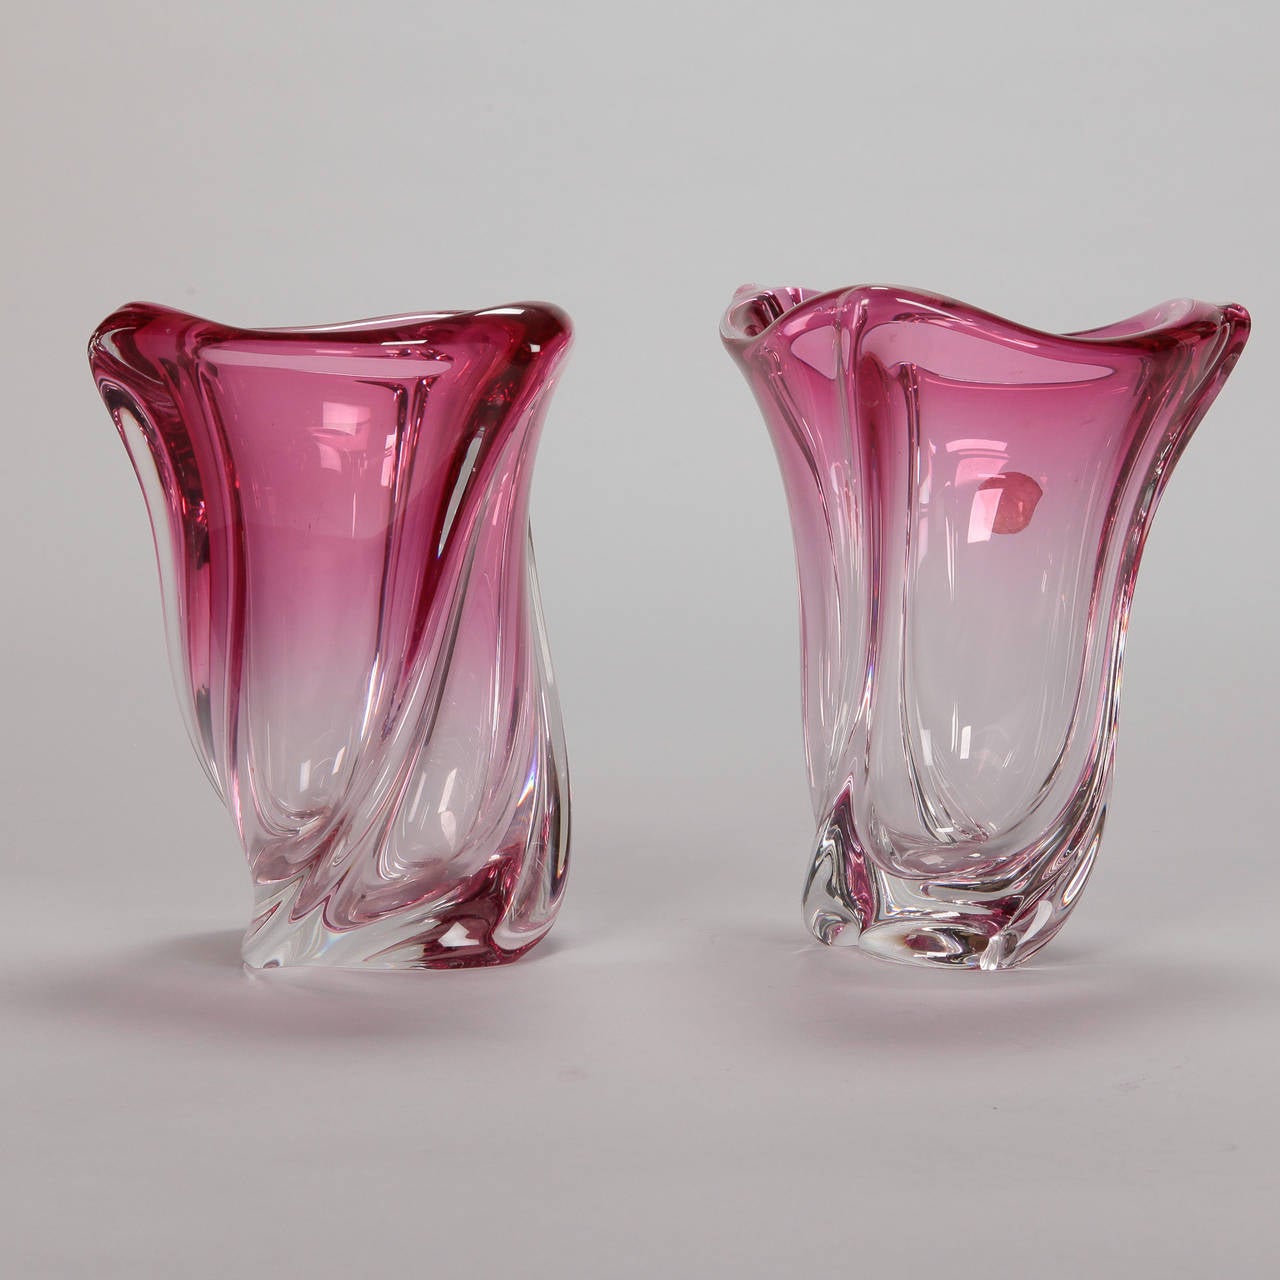 Circa 1960s pair of heavy glass vases by famed Belgian manufacturer Val Saint Lambert. Original label attached. Abstract tulip shaped vessels with ridged sides and a rich rose pink shade with most saturated color at the top, fading to clear at the